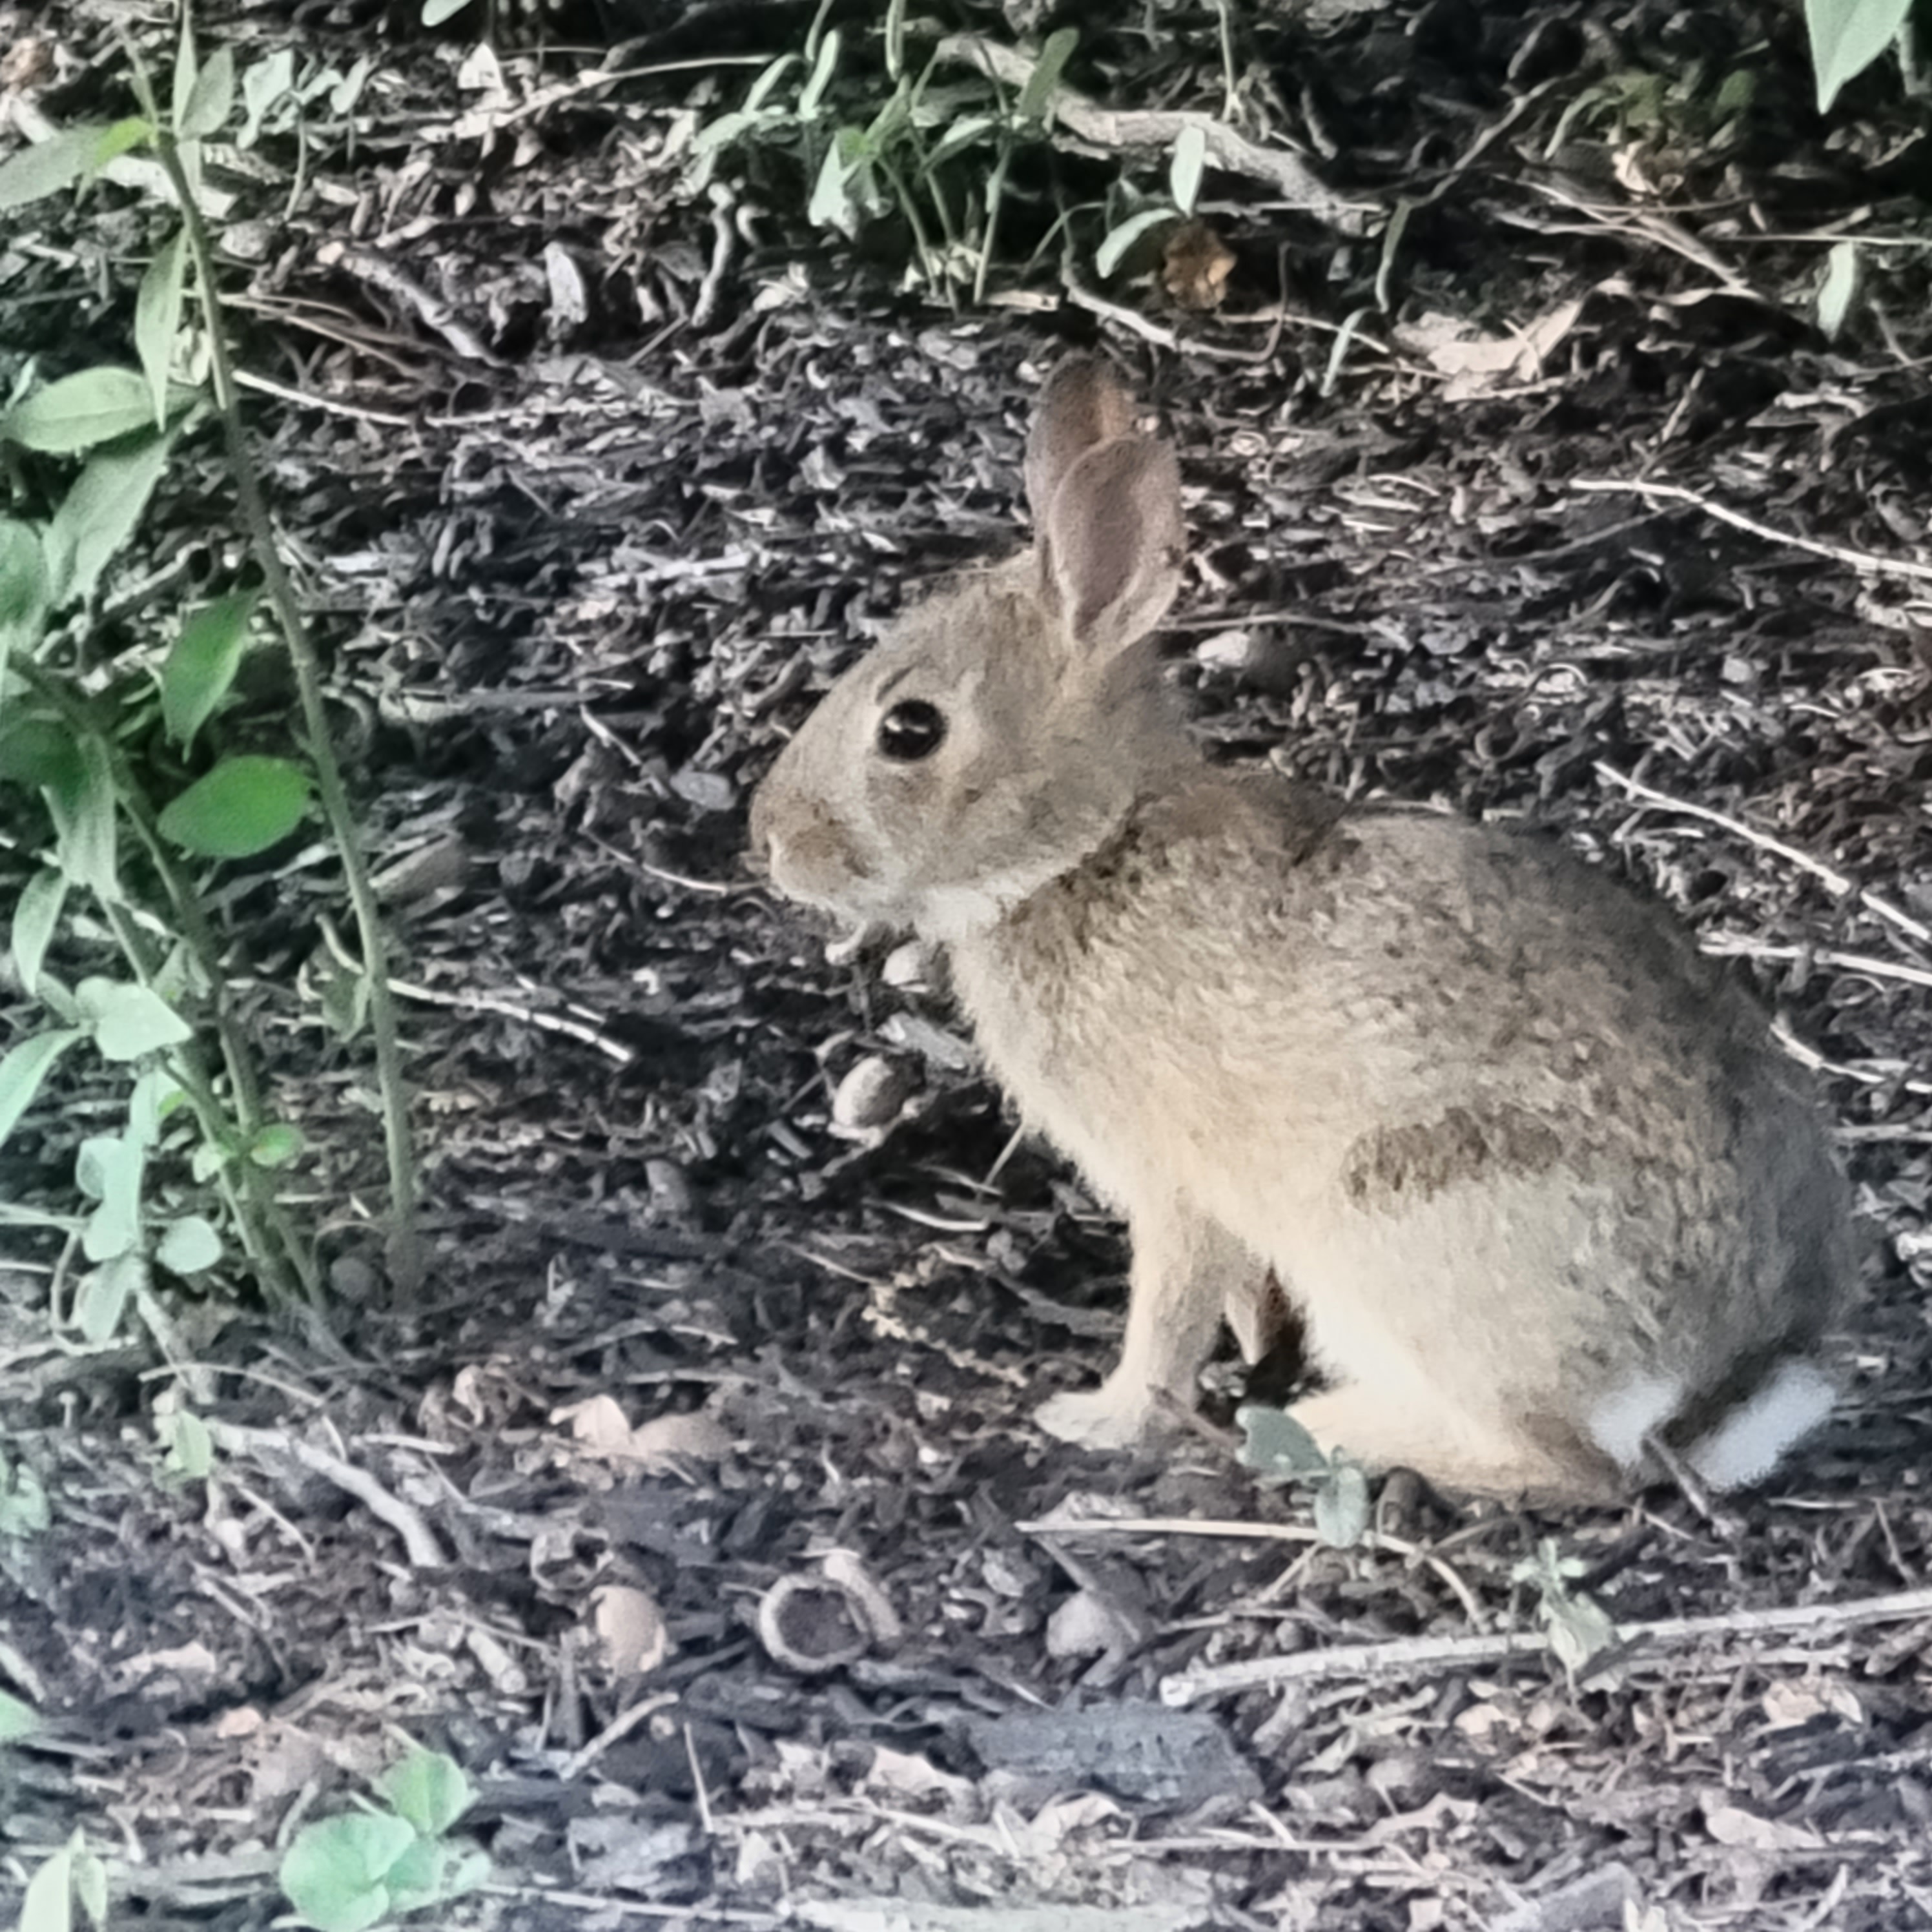 Here is a photo of a small bunny we saw while out for a walk.